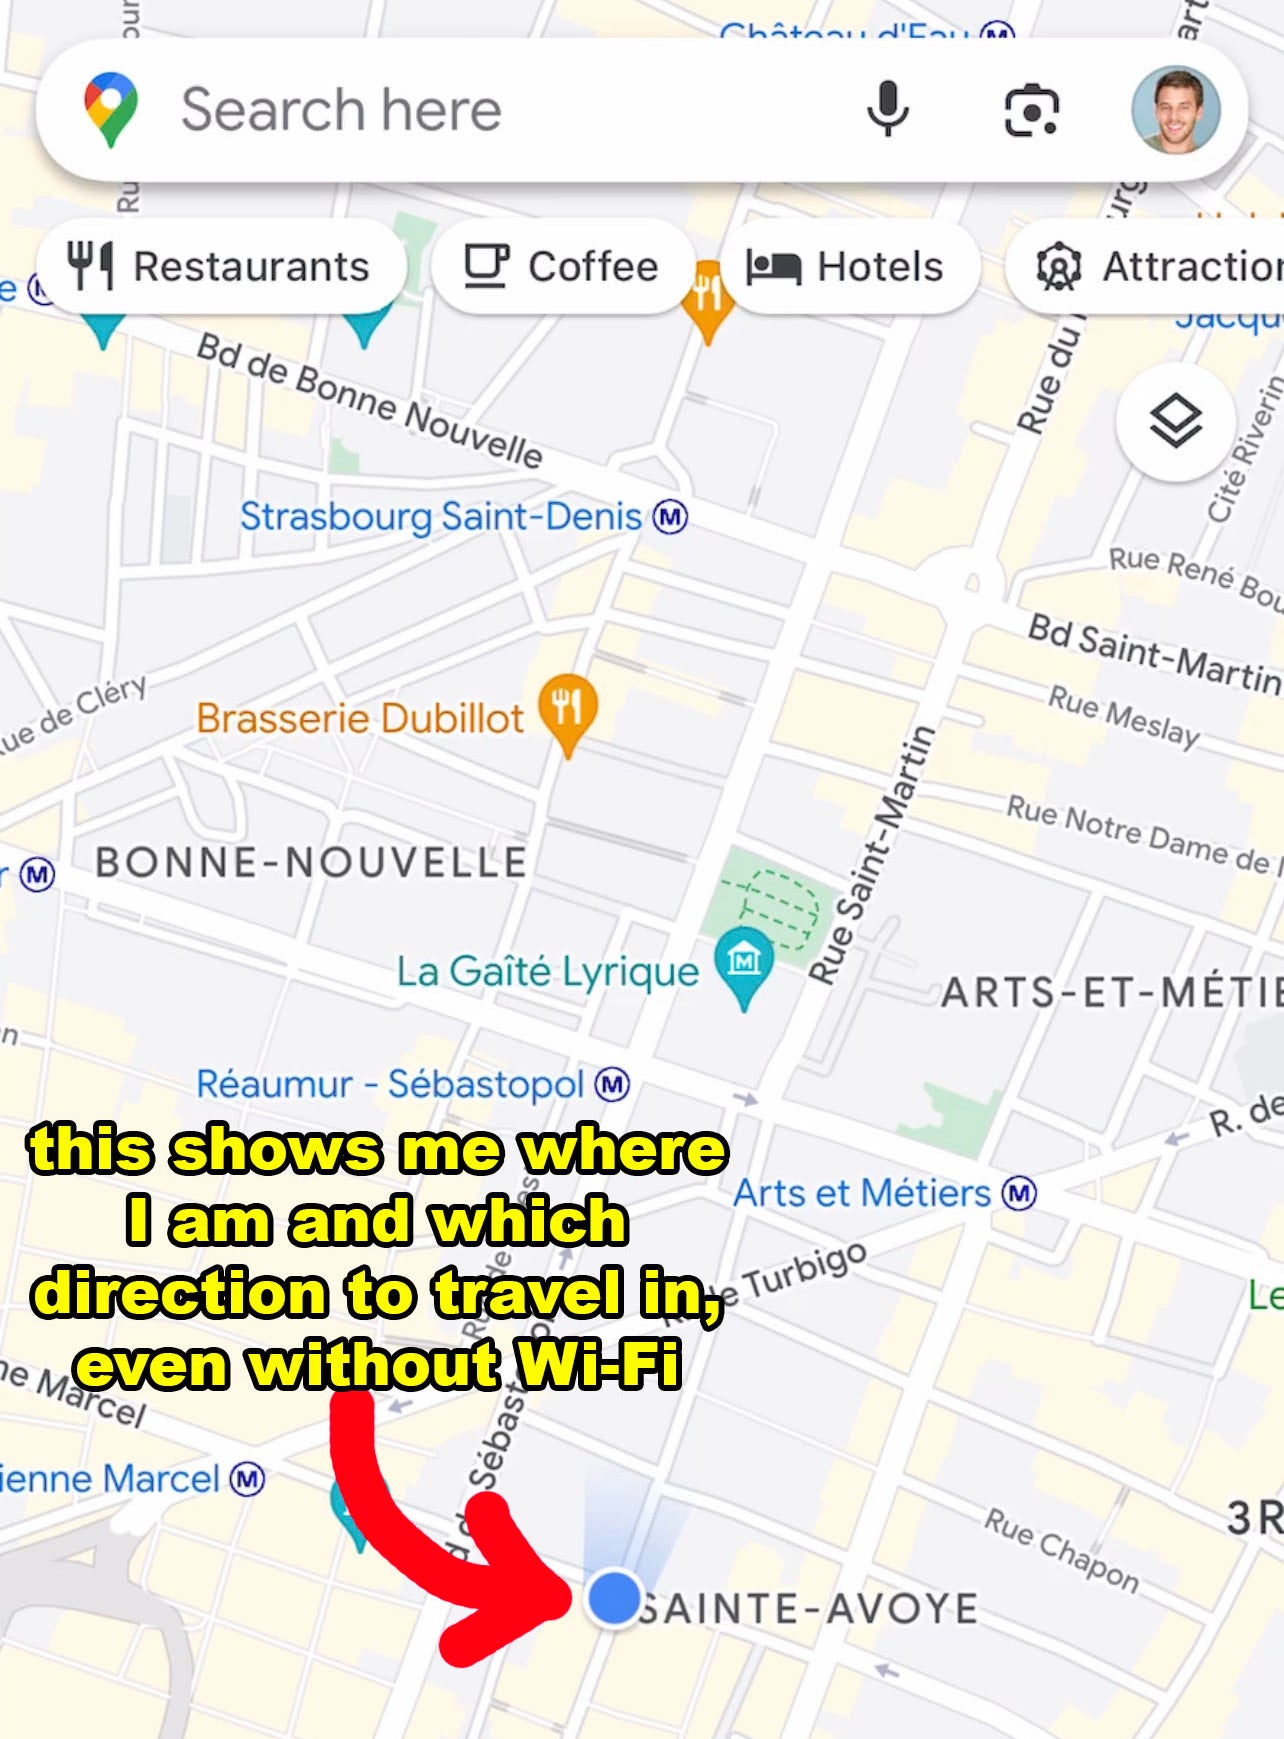 A map of Paris from where I was standing